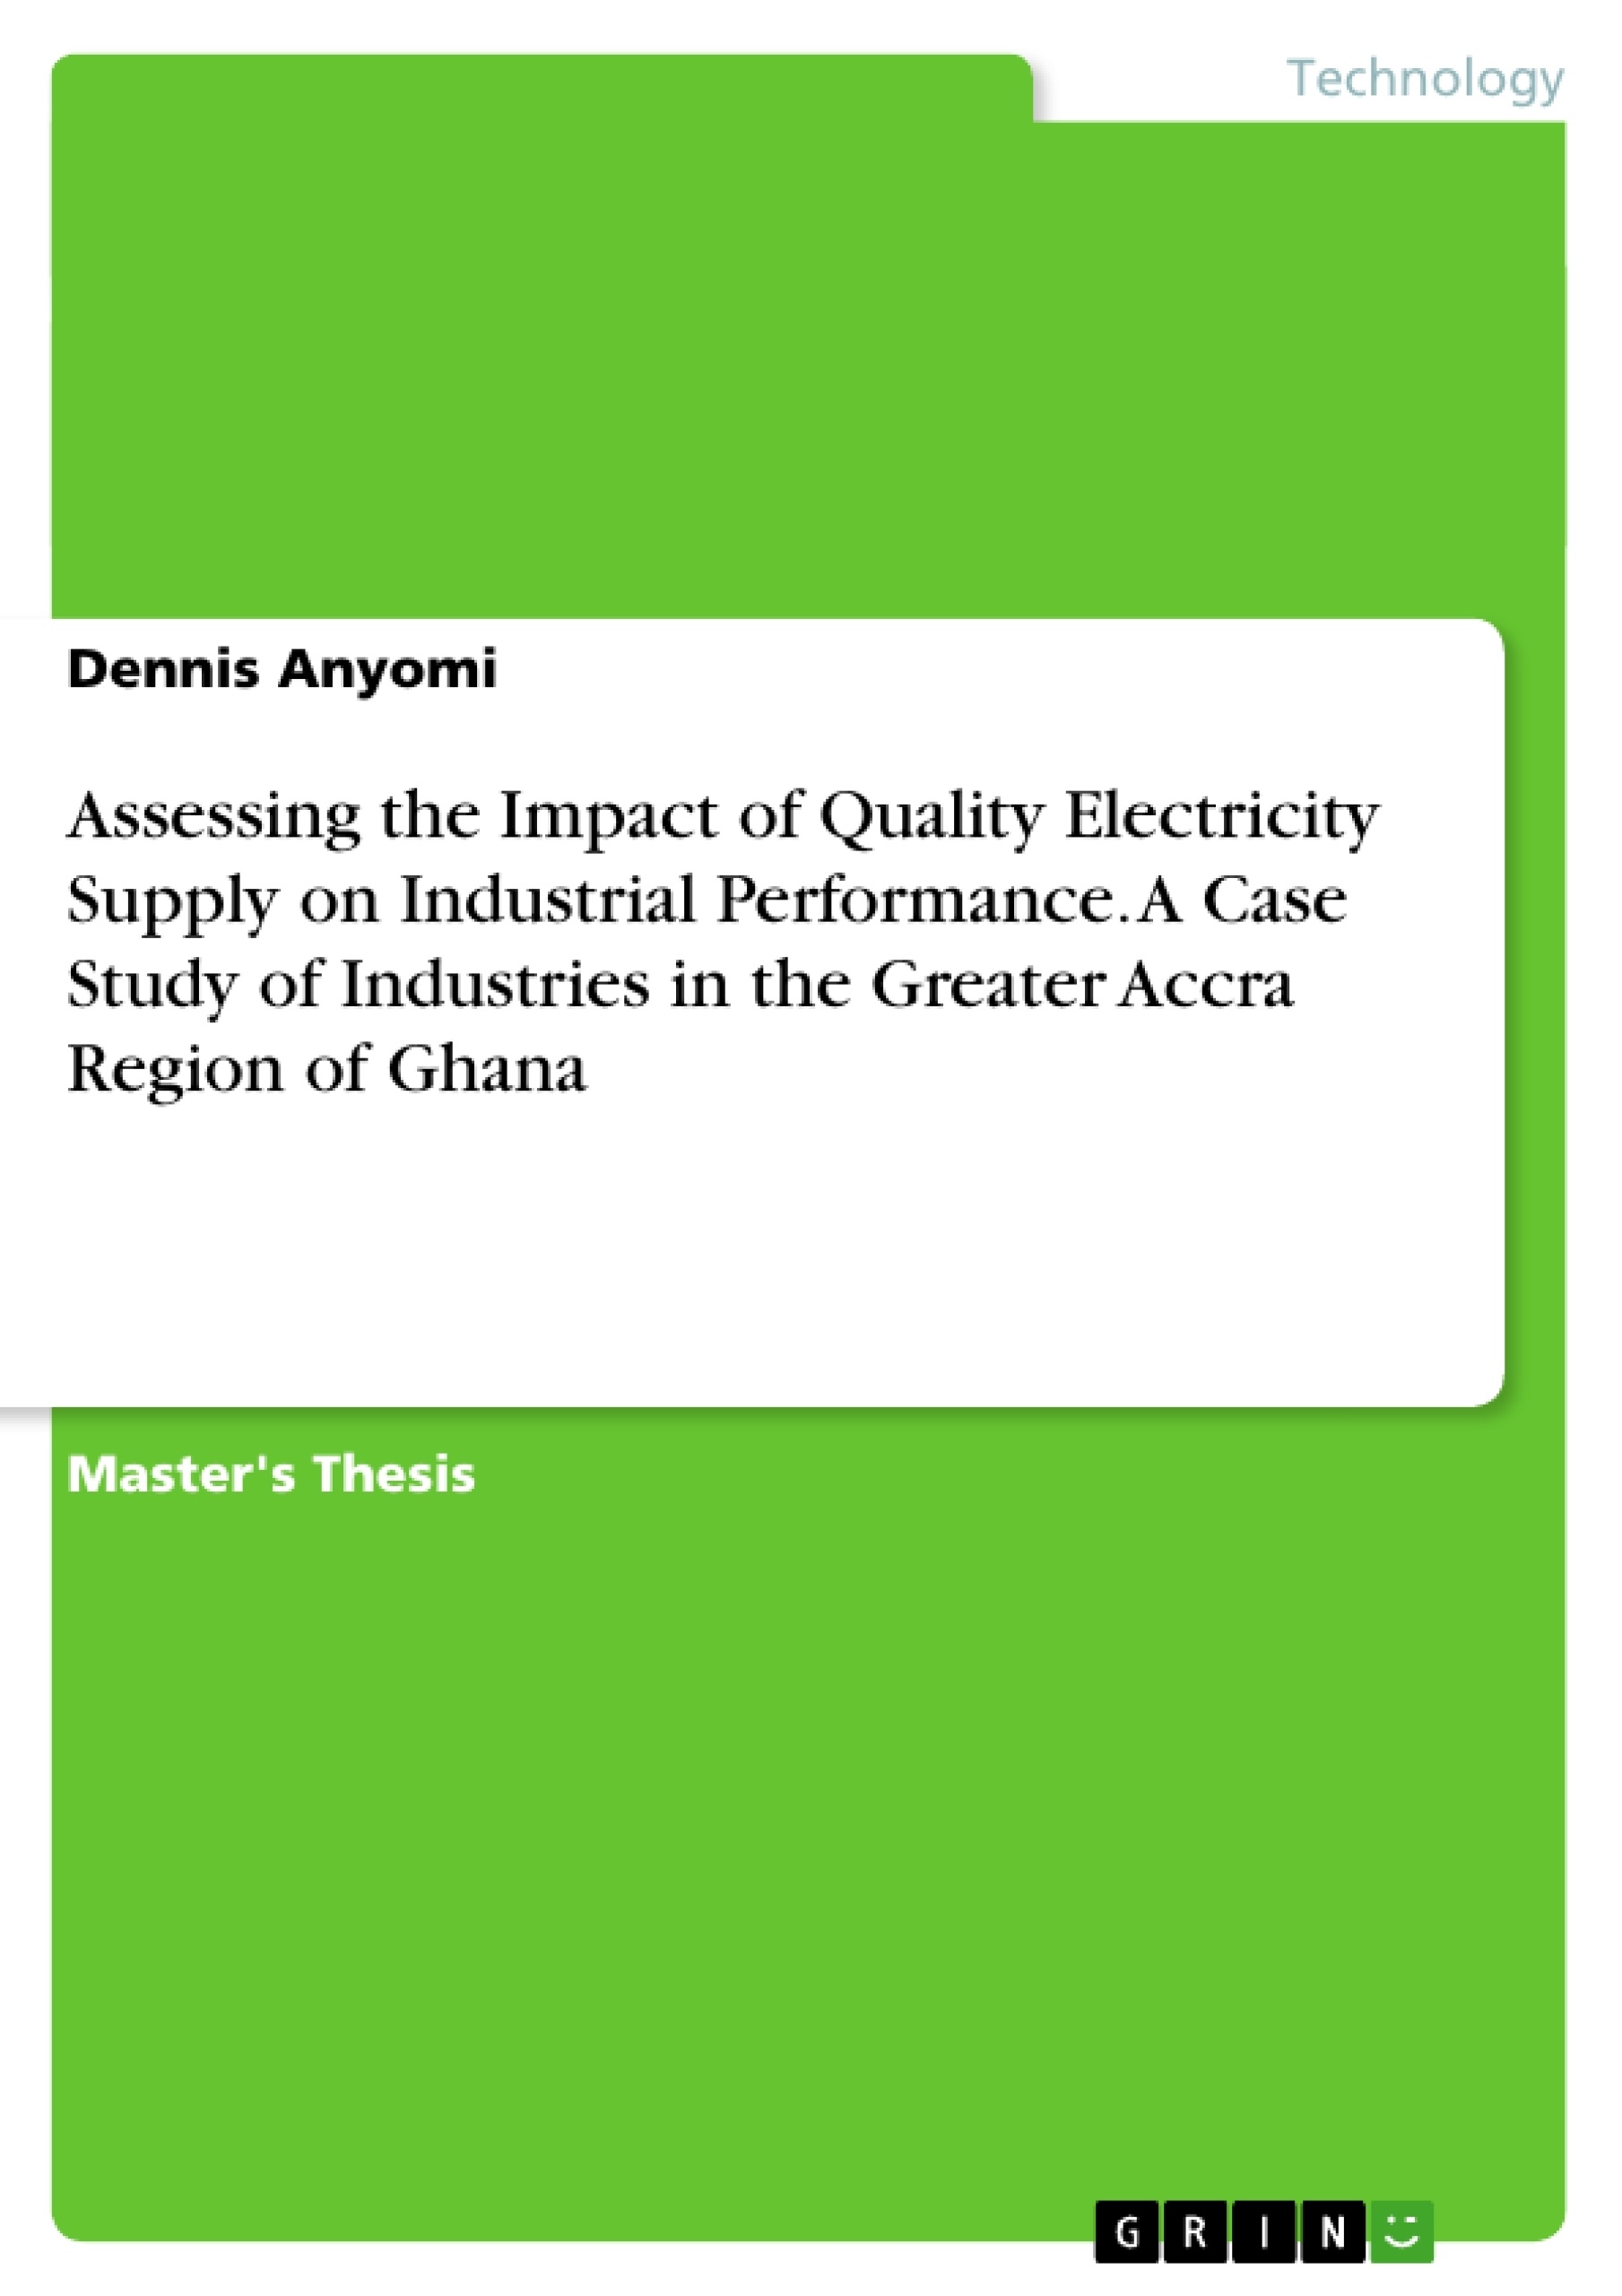 Título: Assessing the Impact of Quality Electricity Supply on Industrial Performance. A Case Study of Industries in the Greater Accra Region of Ghana